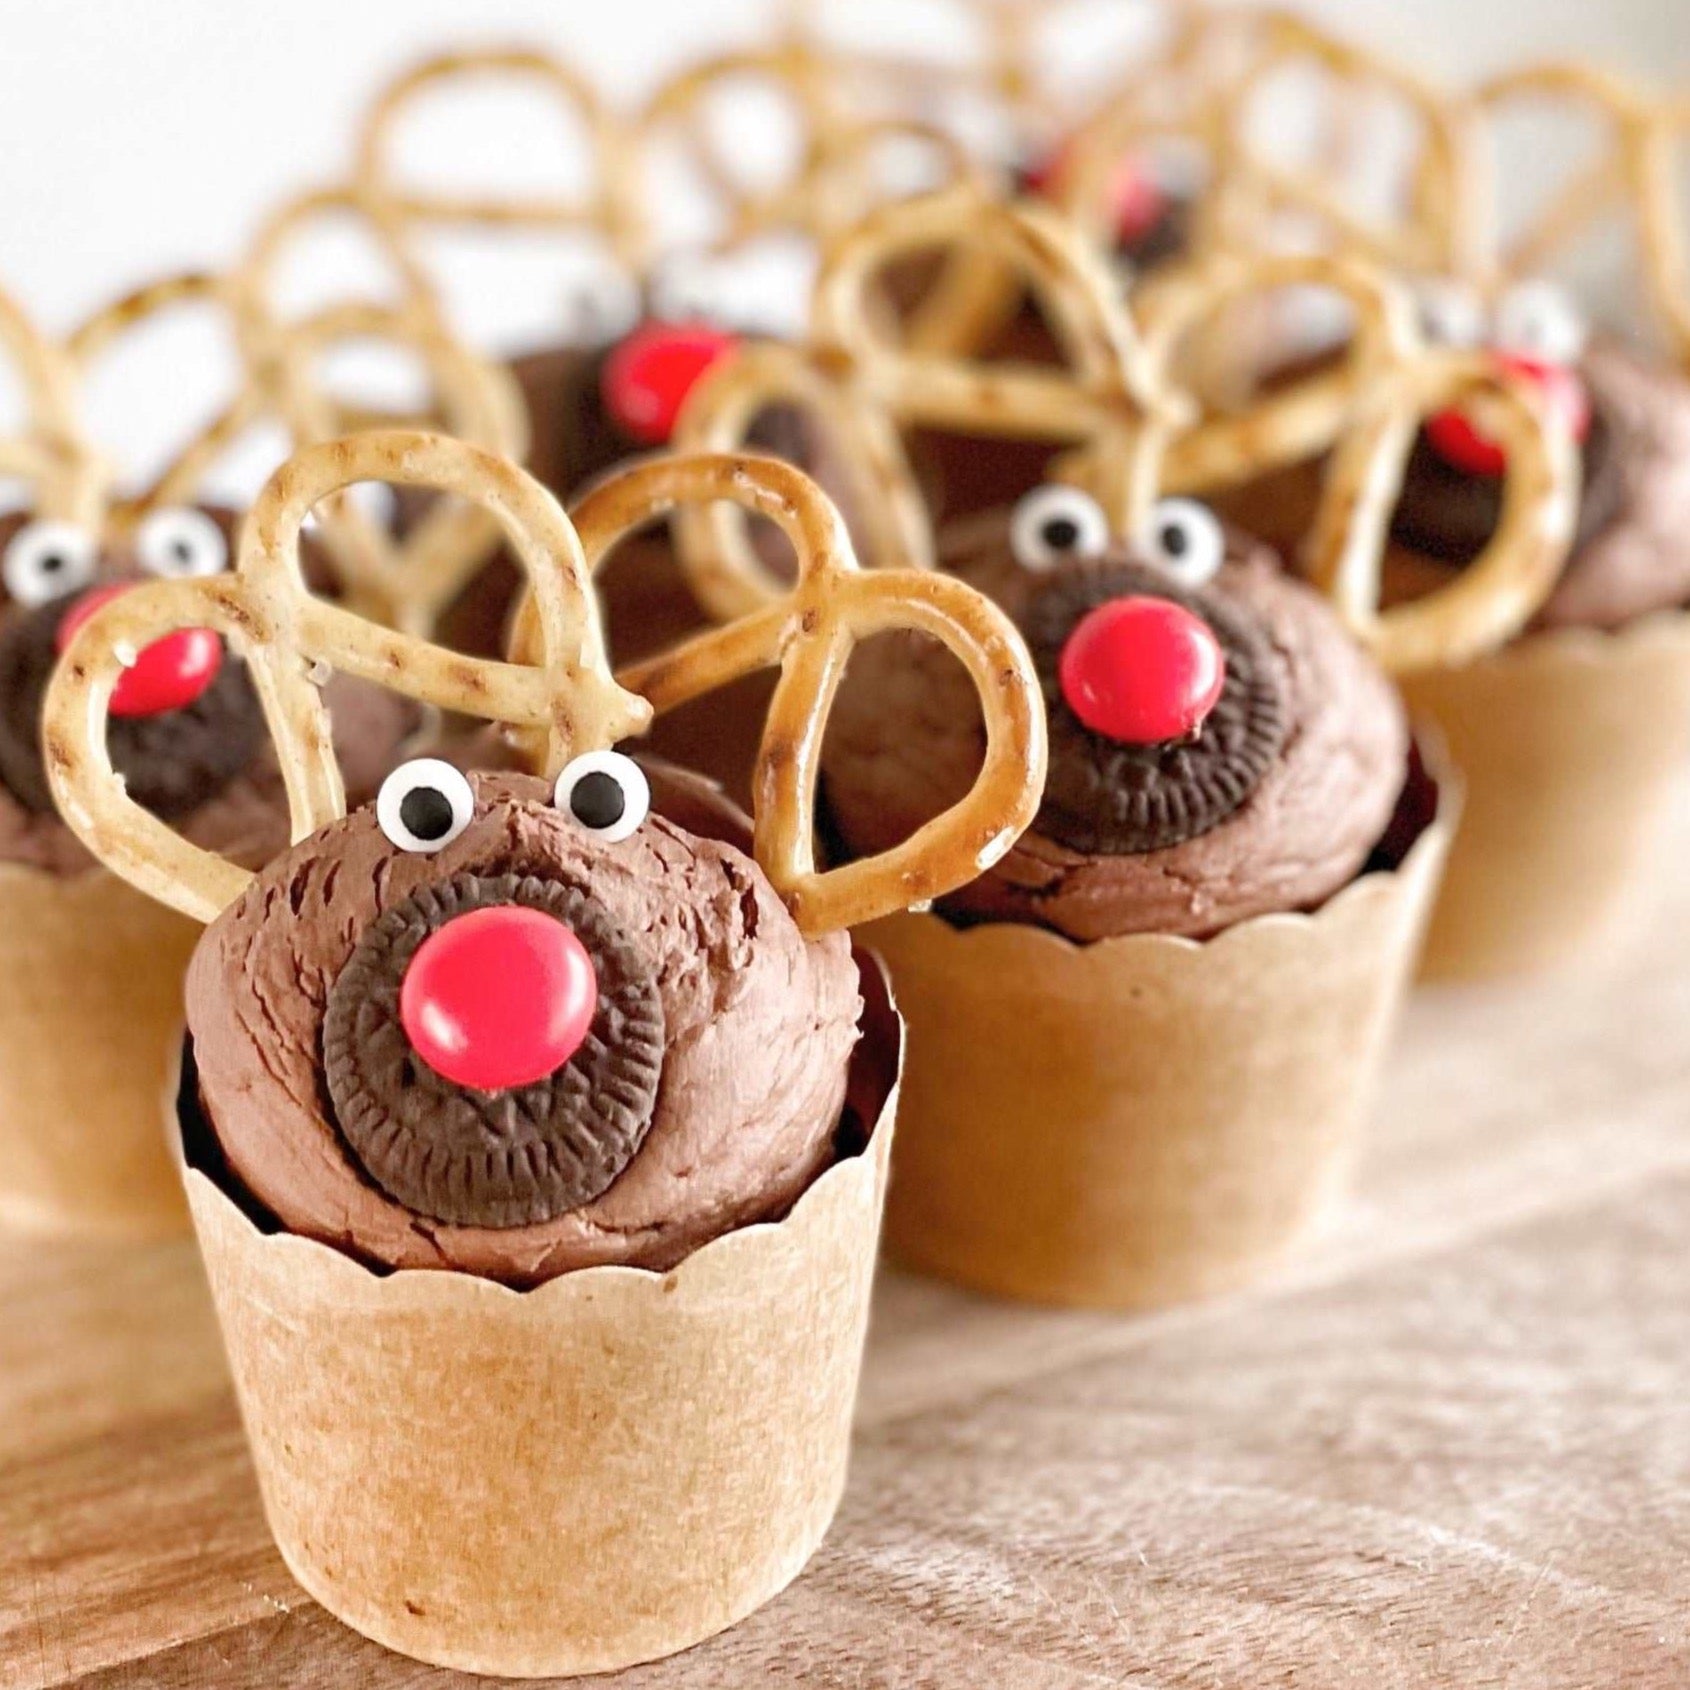 Rudolph The Red Nosed Reindeer, Rudolph Cupcakes, DIY Cupcakes, Christmas Cupcakes, Xmas Cupcakes, Chocolate Cupcakes, Easy Cupcakes, Cupcakes for Kids, Easy Decorating